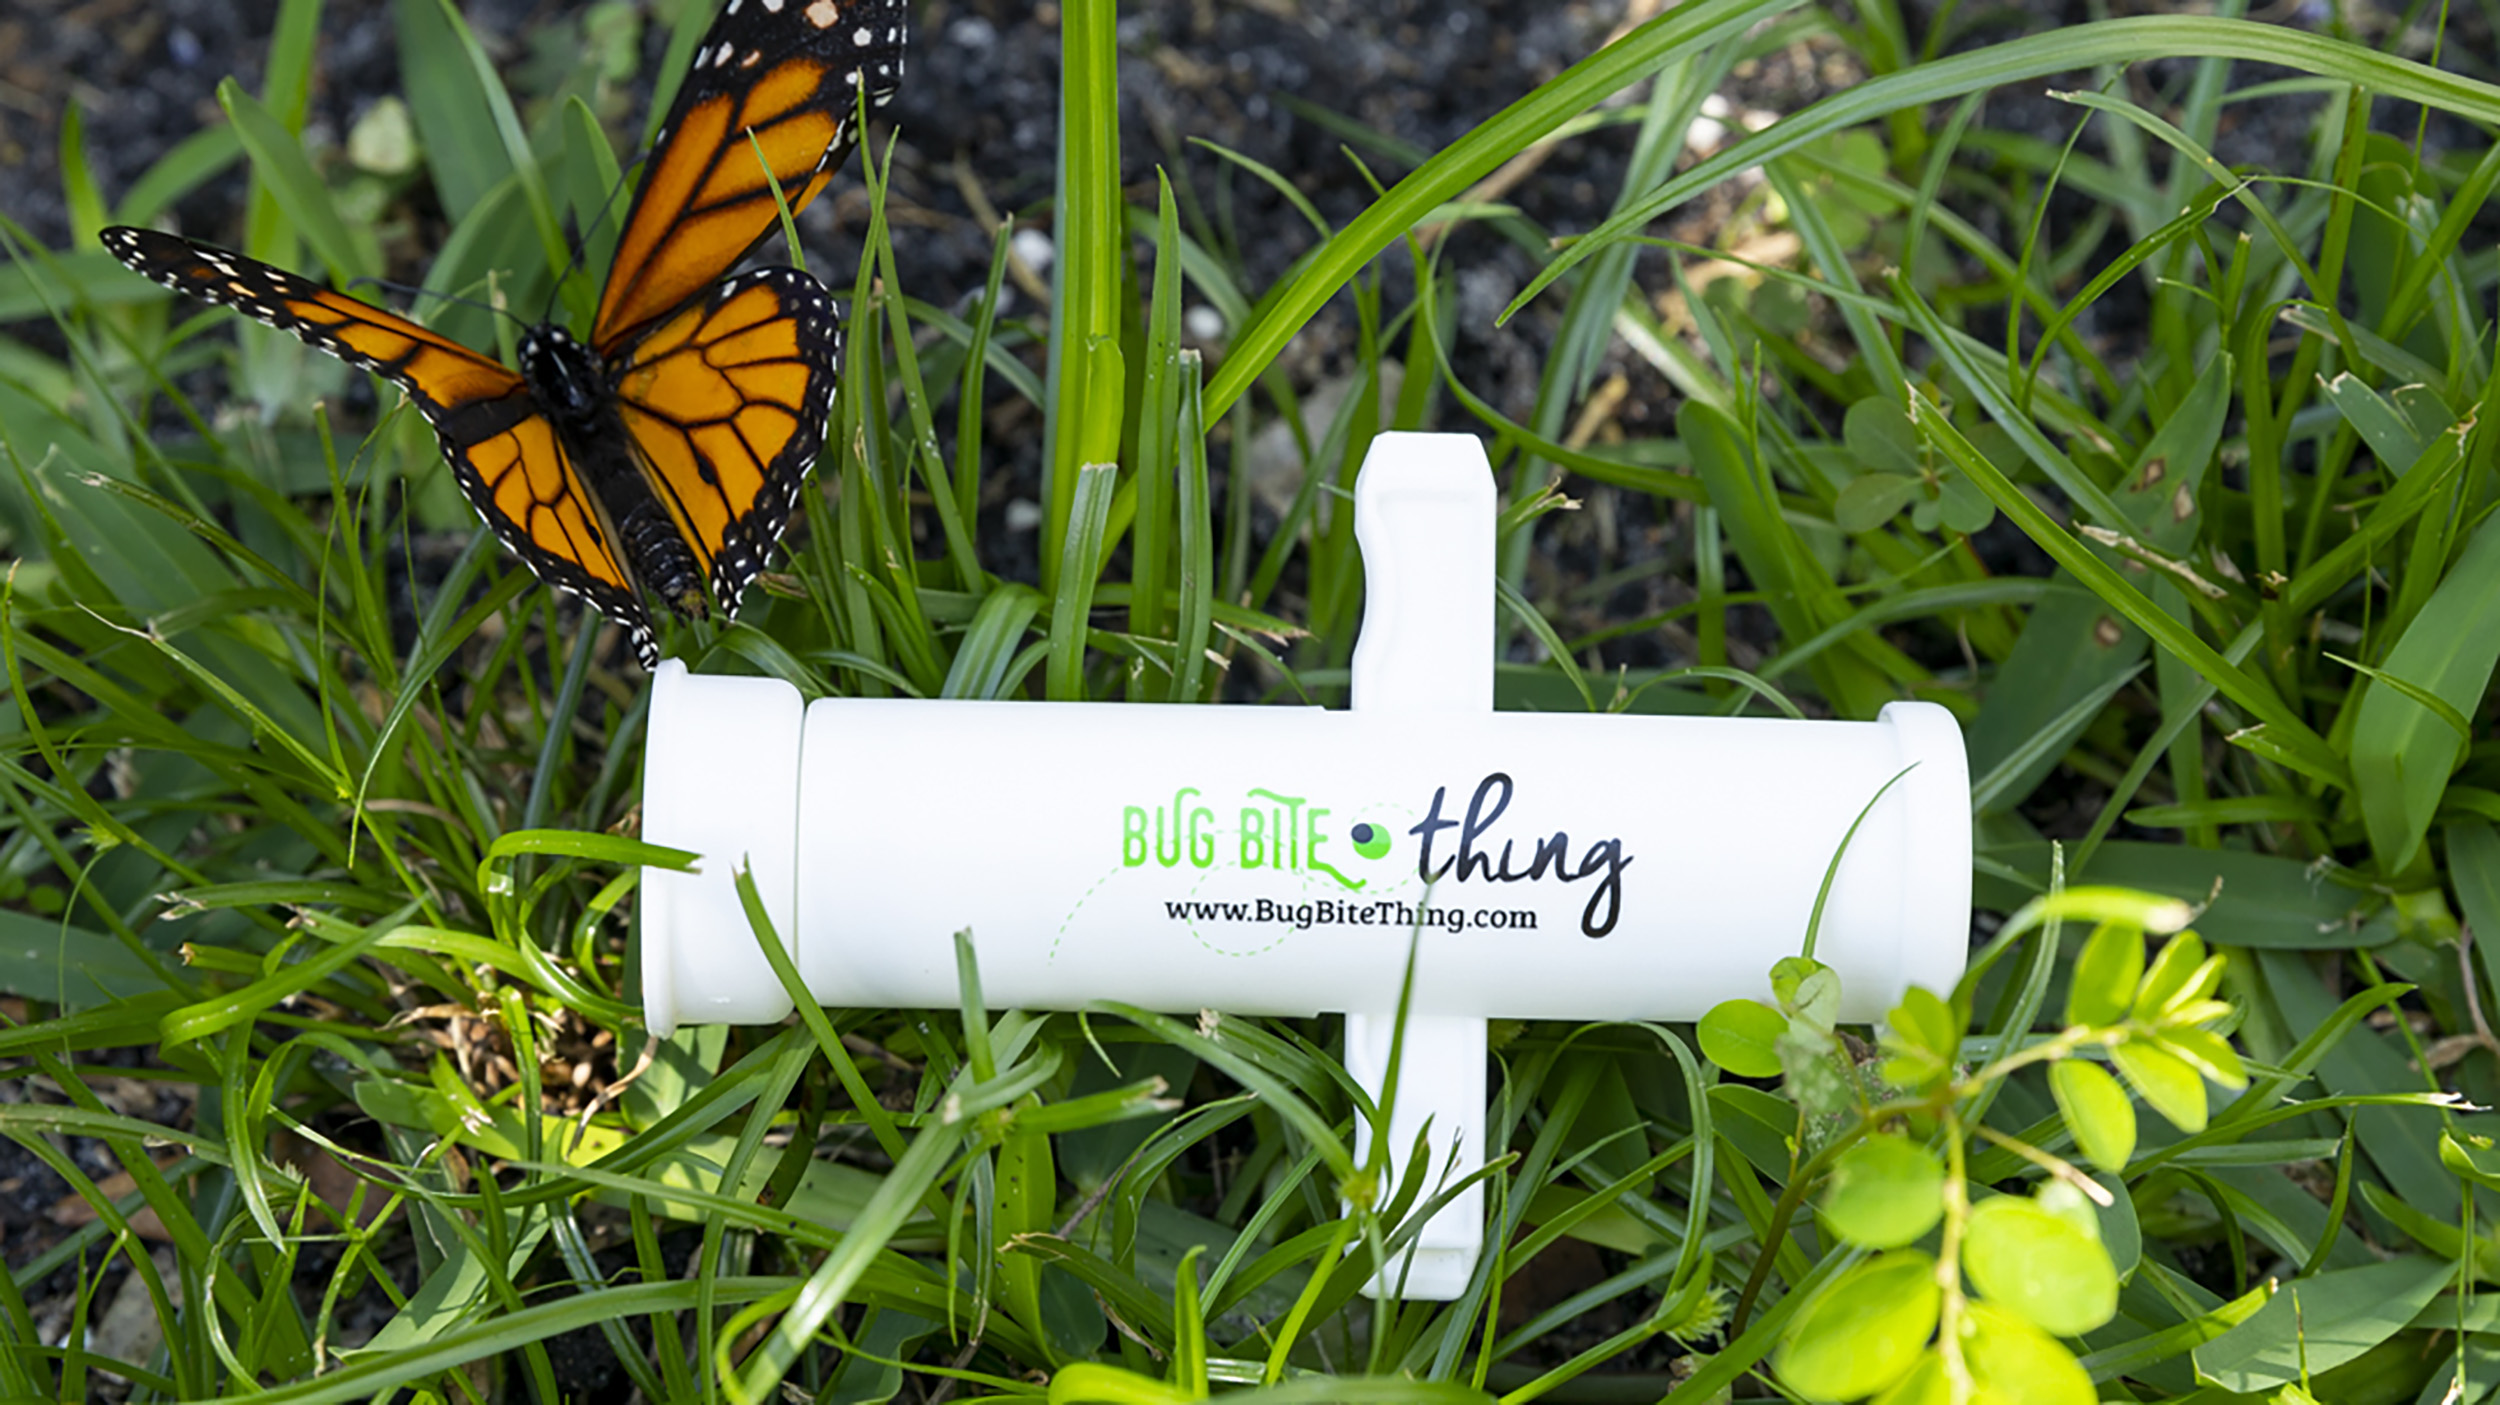 Free From Chemicals For Pain Caused By Insect Electronic Bite Relief Device 